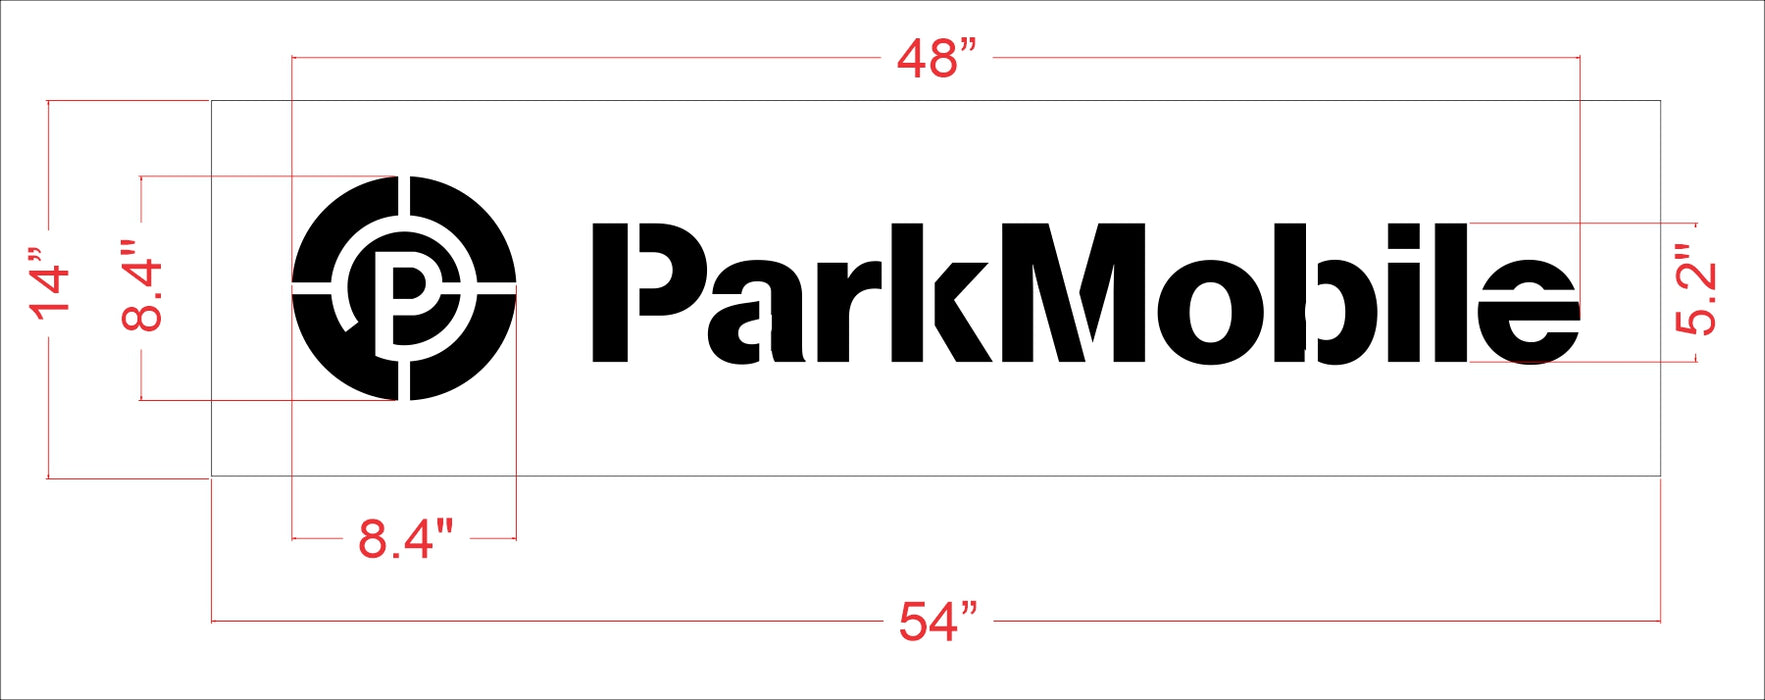 6" and 5.2" Park Mobile with Logo Stencil